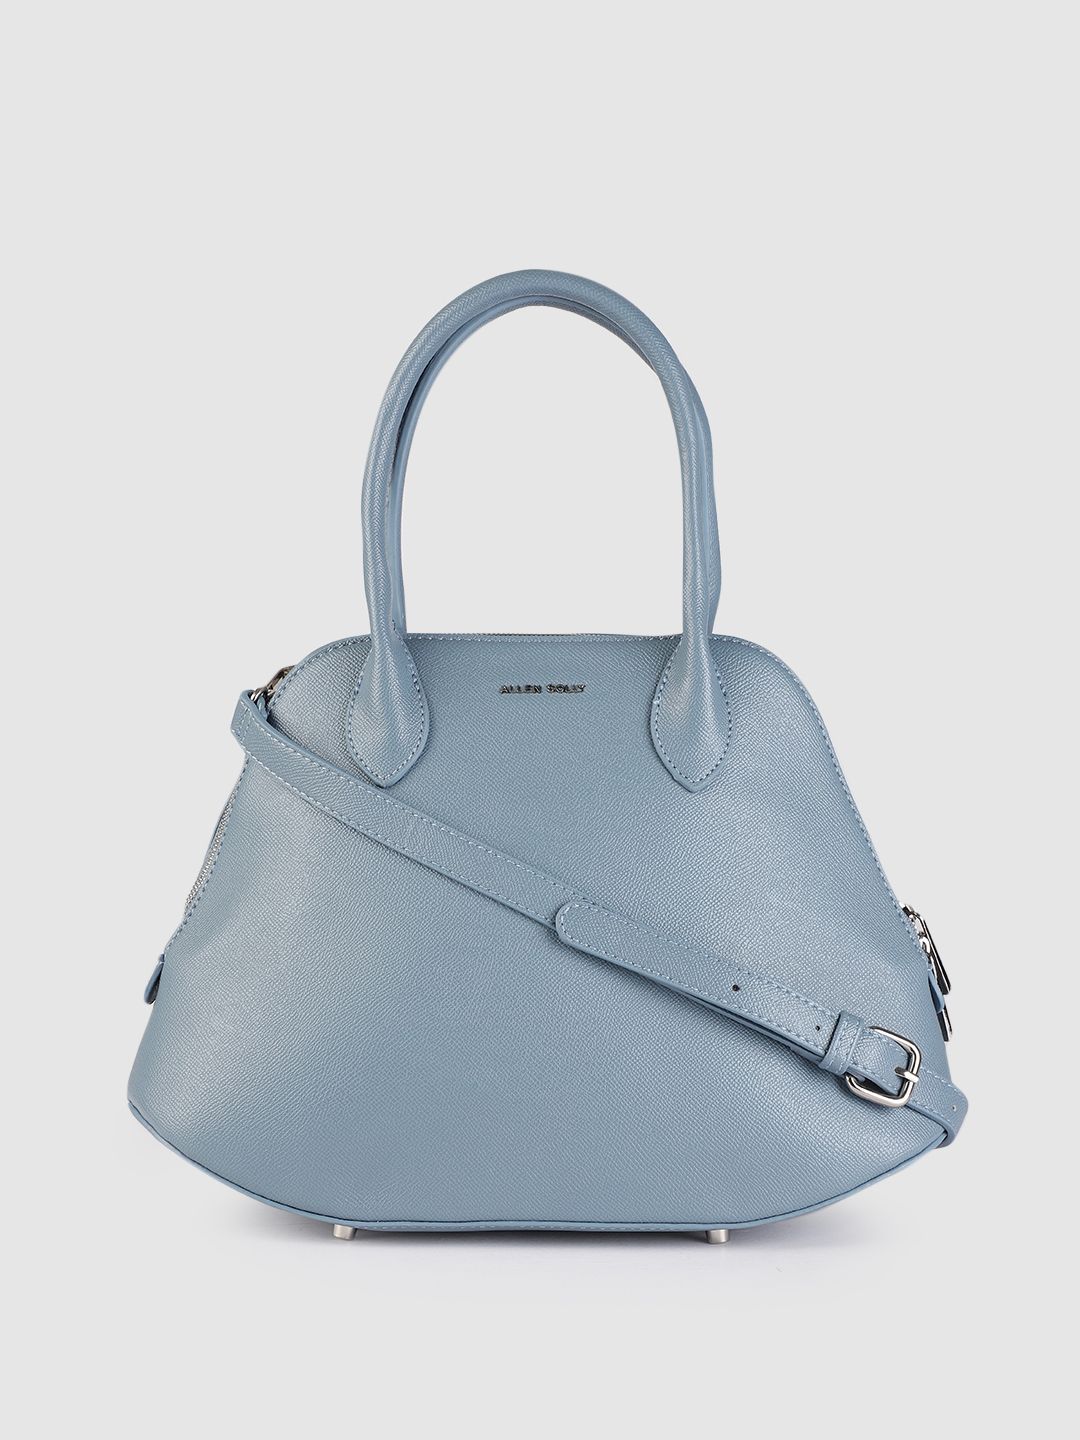 Allen Solly Blue PU Structured Handheld Bag Price in India